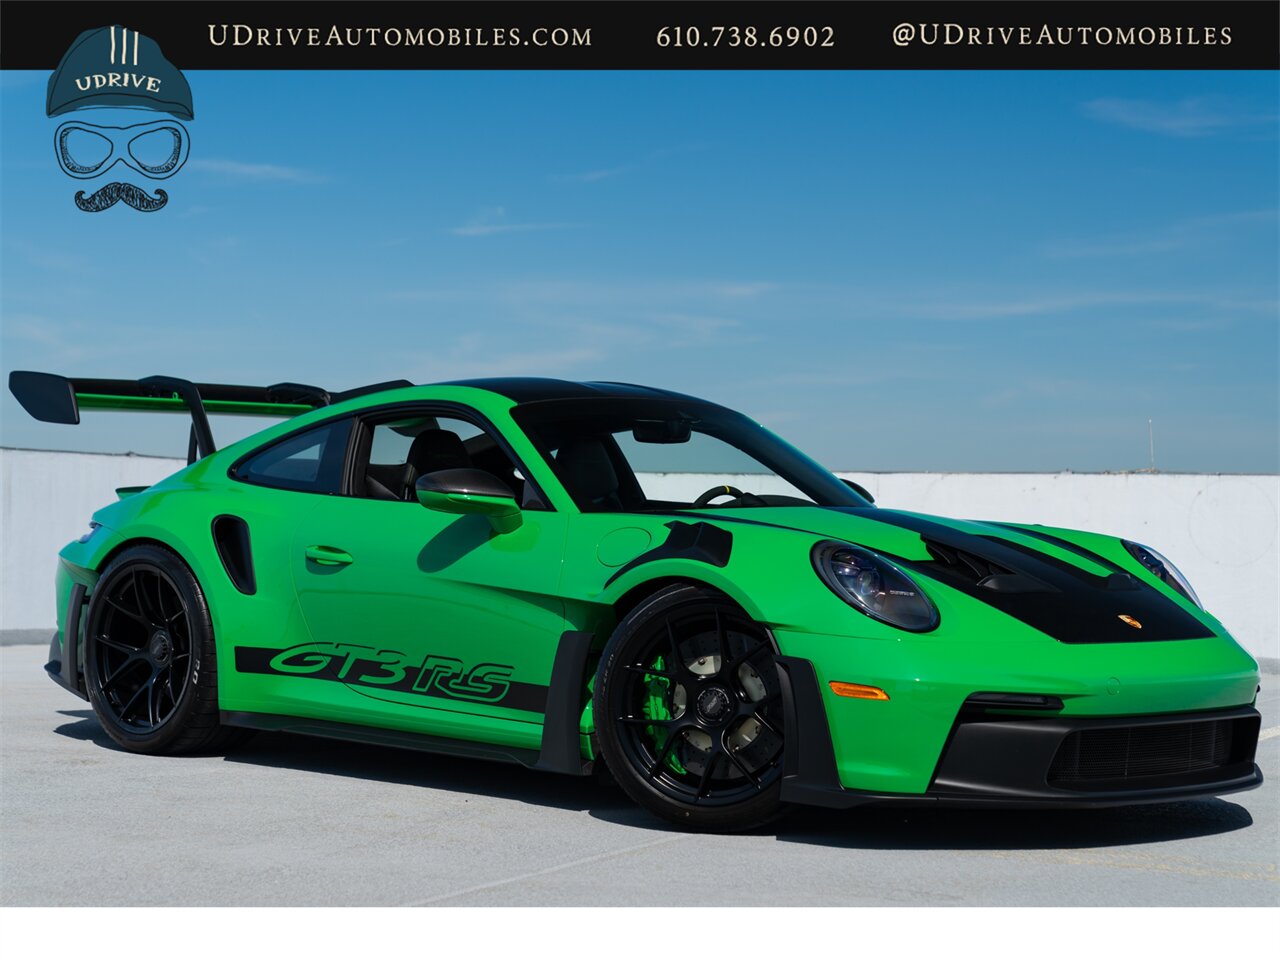 2023 Porsche 911 GT3 RS  Weissach Pkg FAL Full Body PPF $43k in Extras - Photo 3 - West Chester, PA 19382